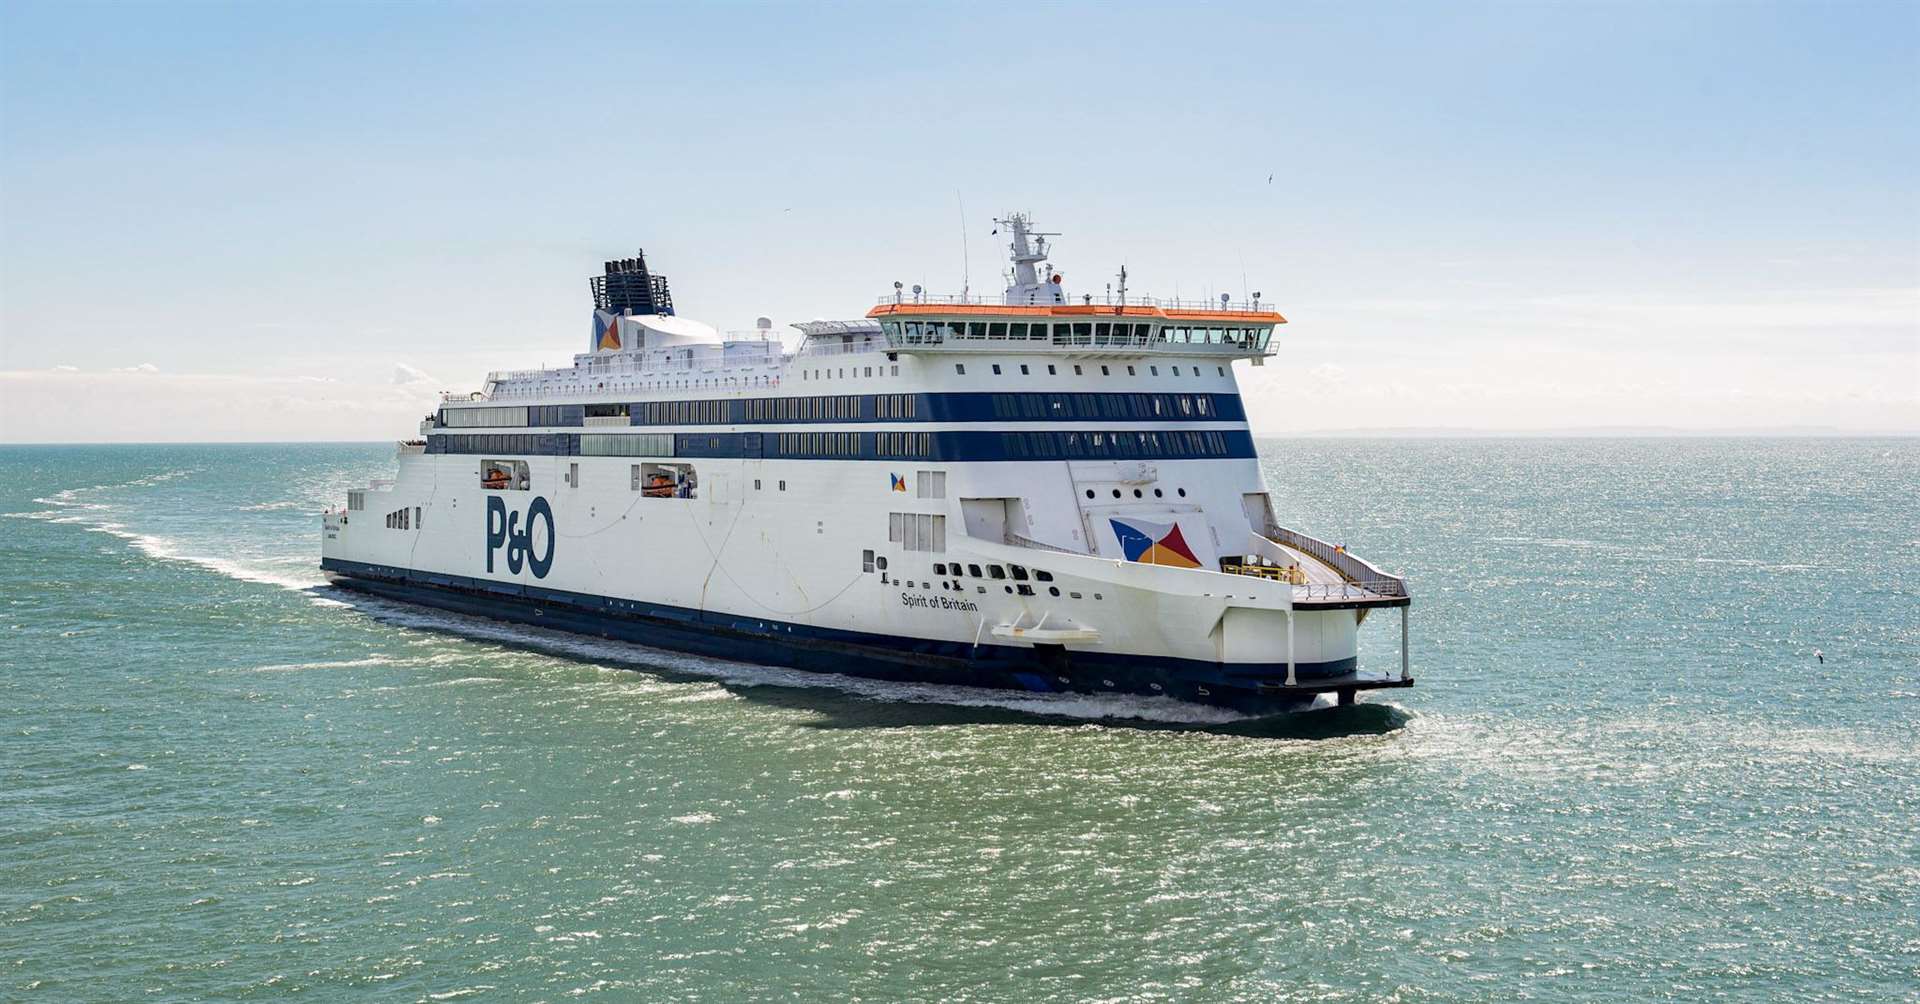 Take a short or long break return from Dover to Calais for just £99, when you book before 28 February 2022!